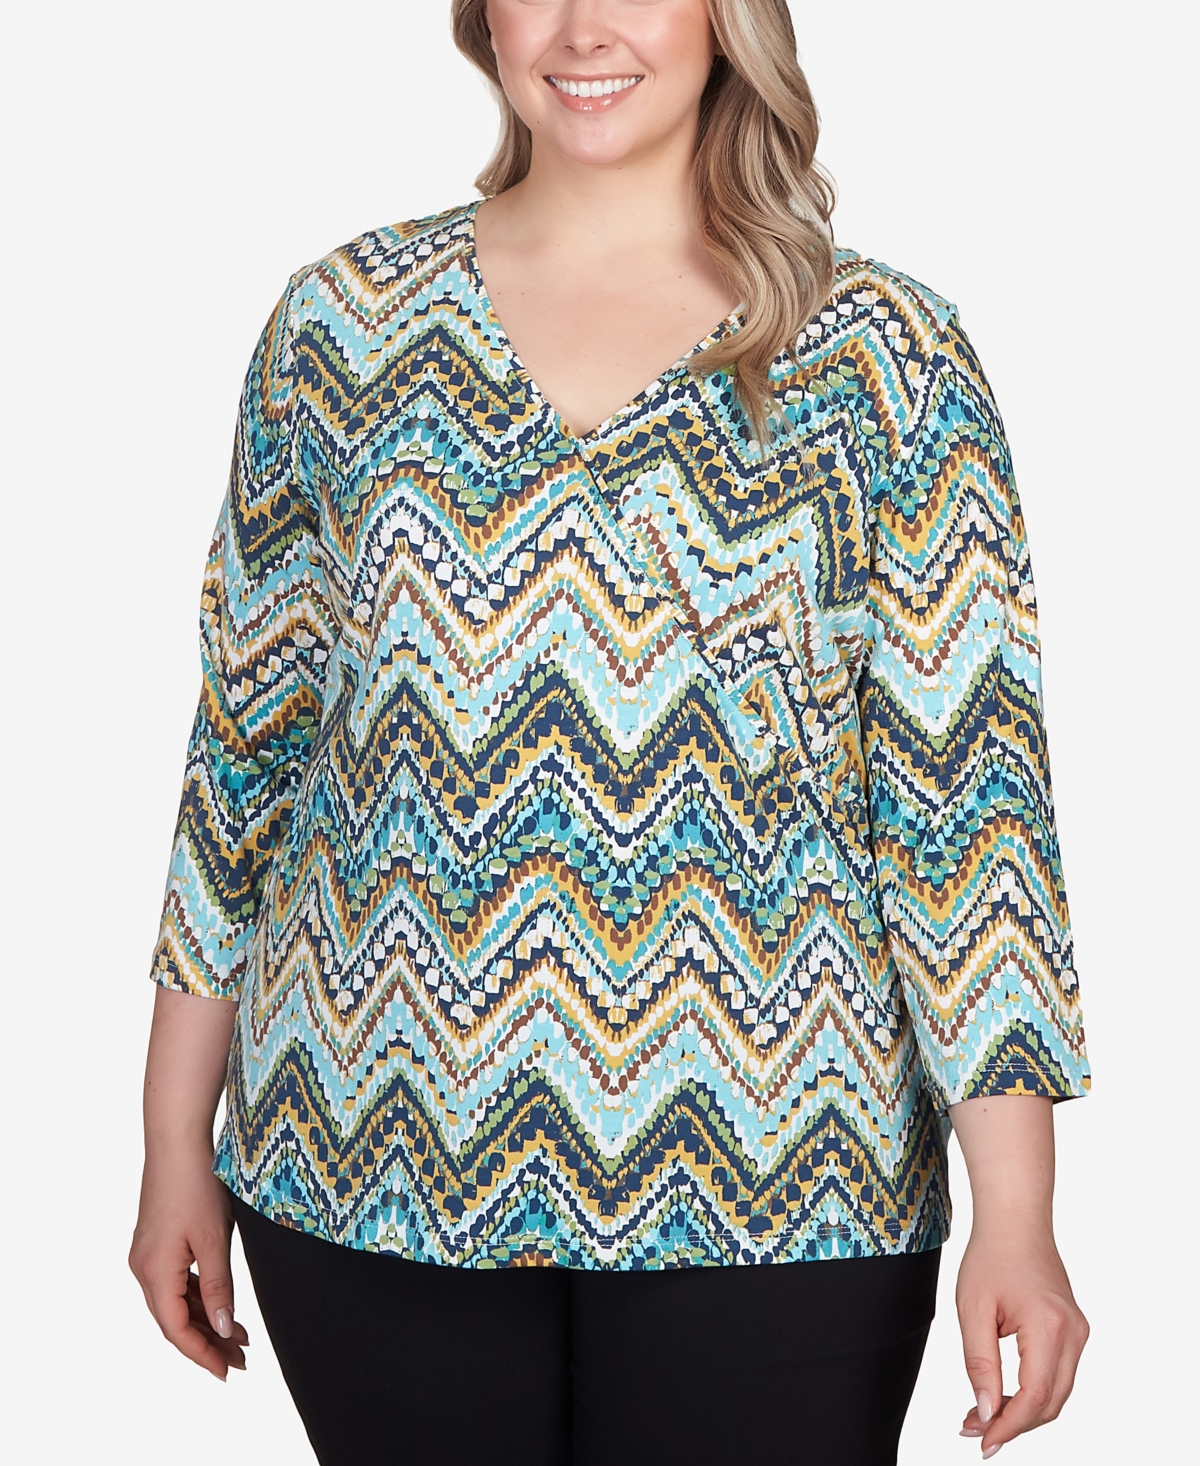 Plus Size Teal The Show Printed 3/4 Sleeve Top - Cocoa Multi